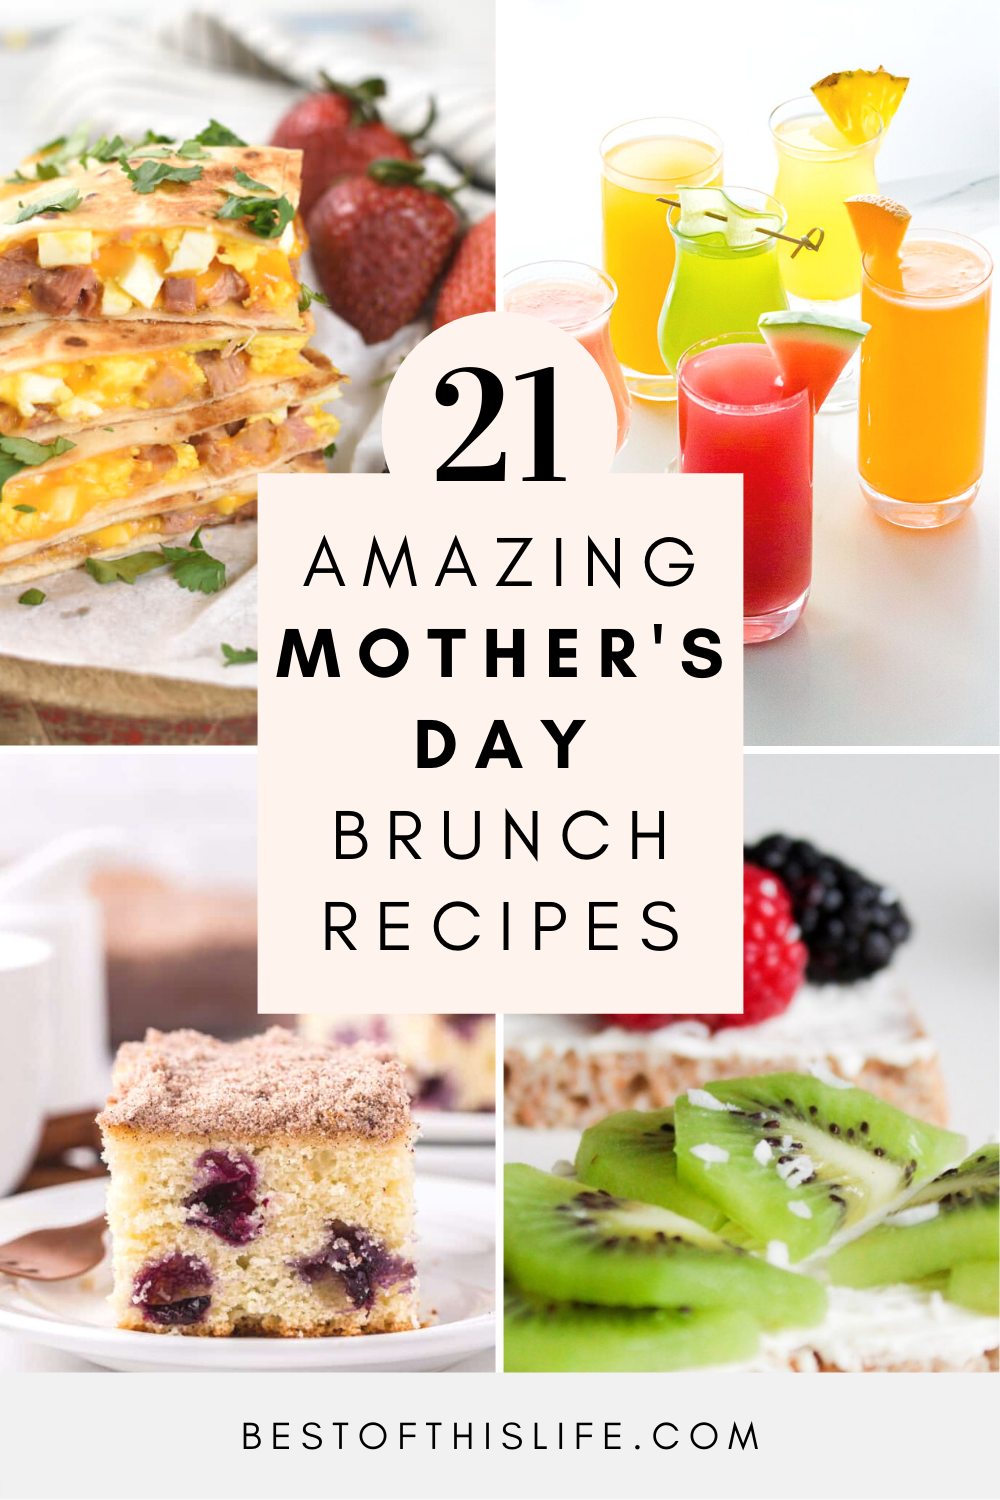 21 Amazing Mother’s Day Brunch Recipes